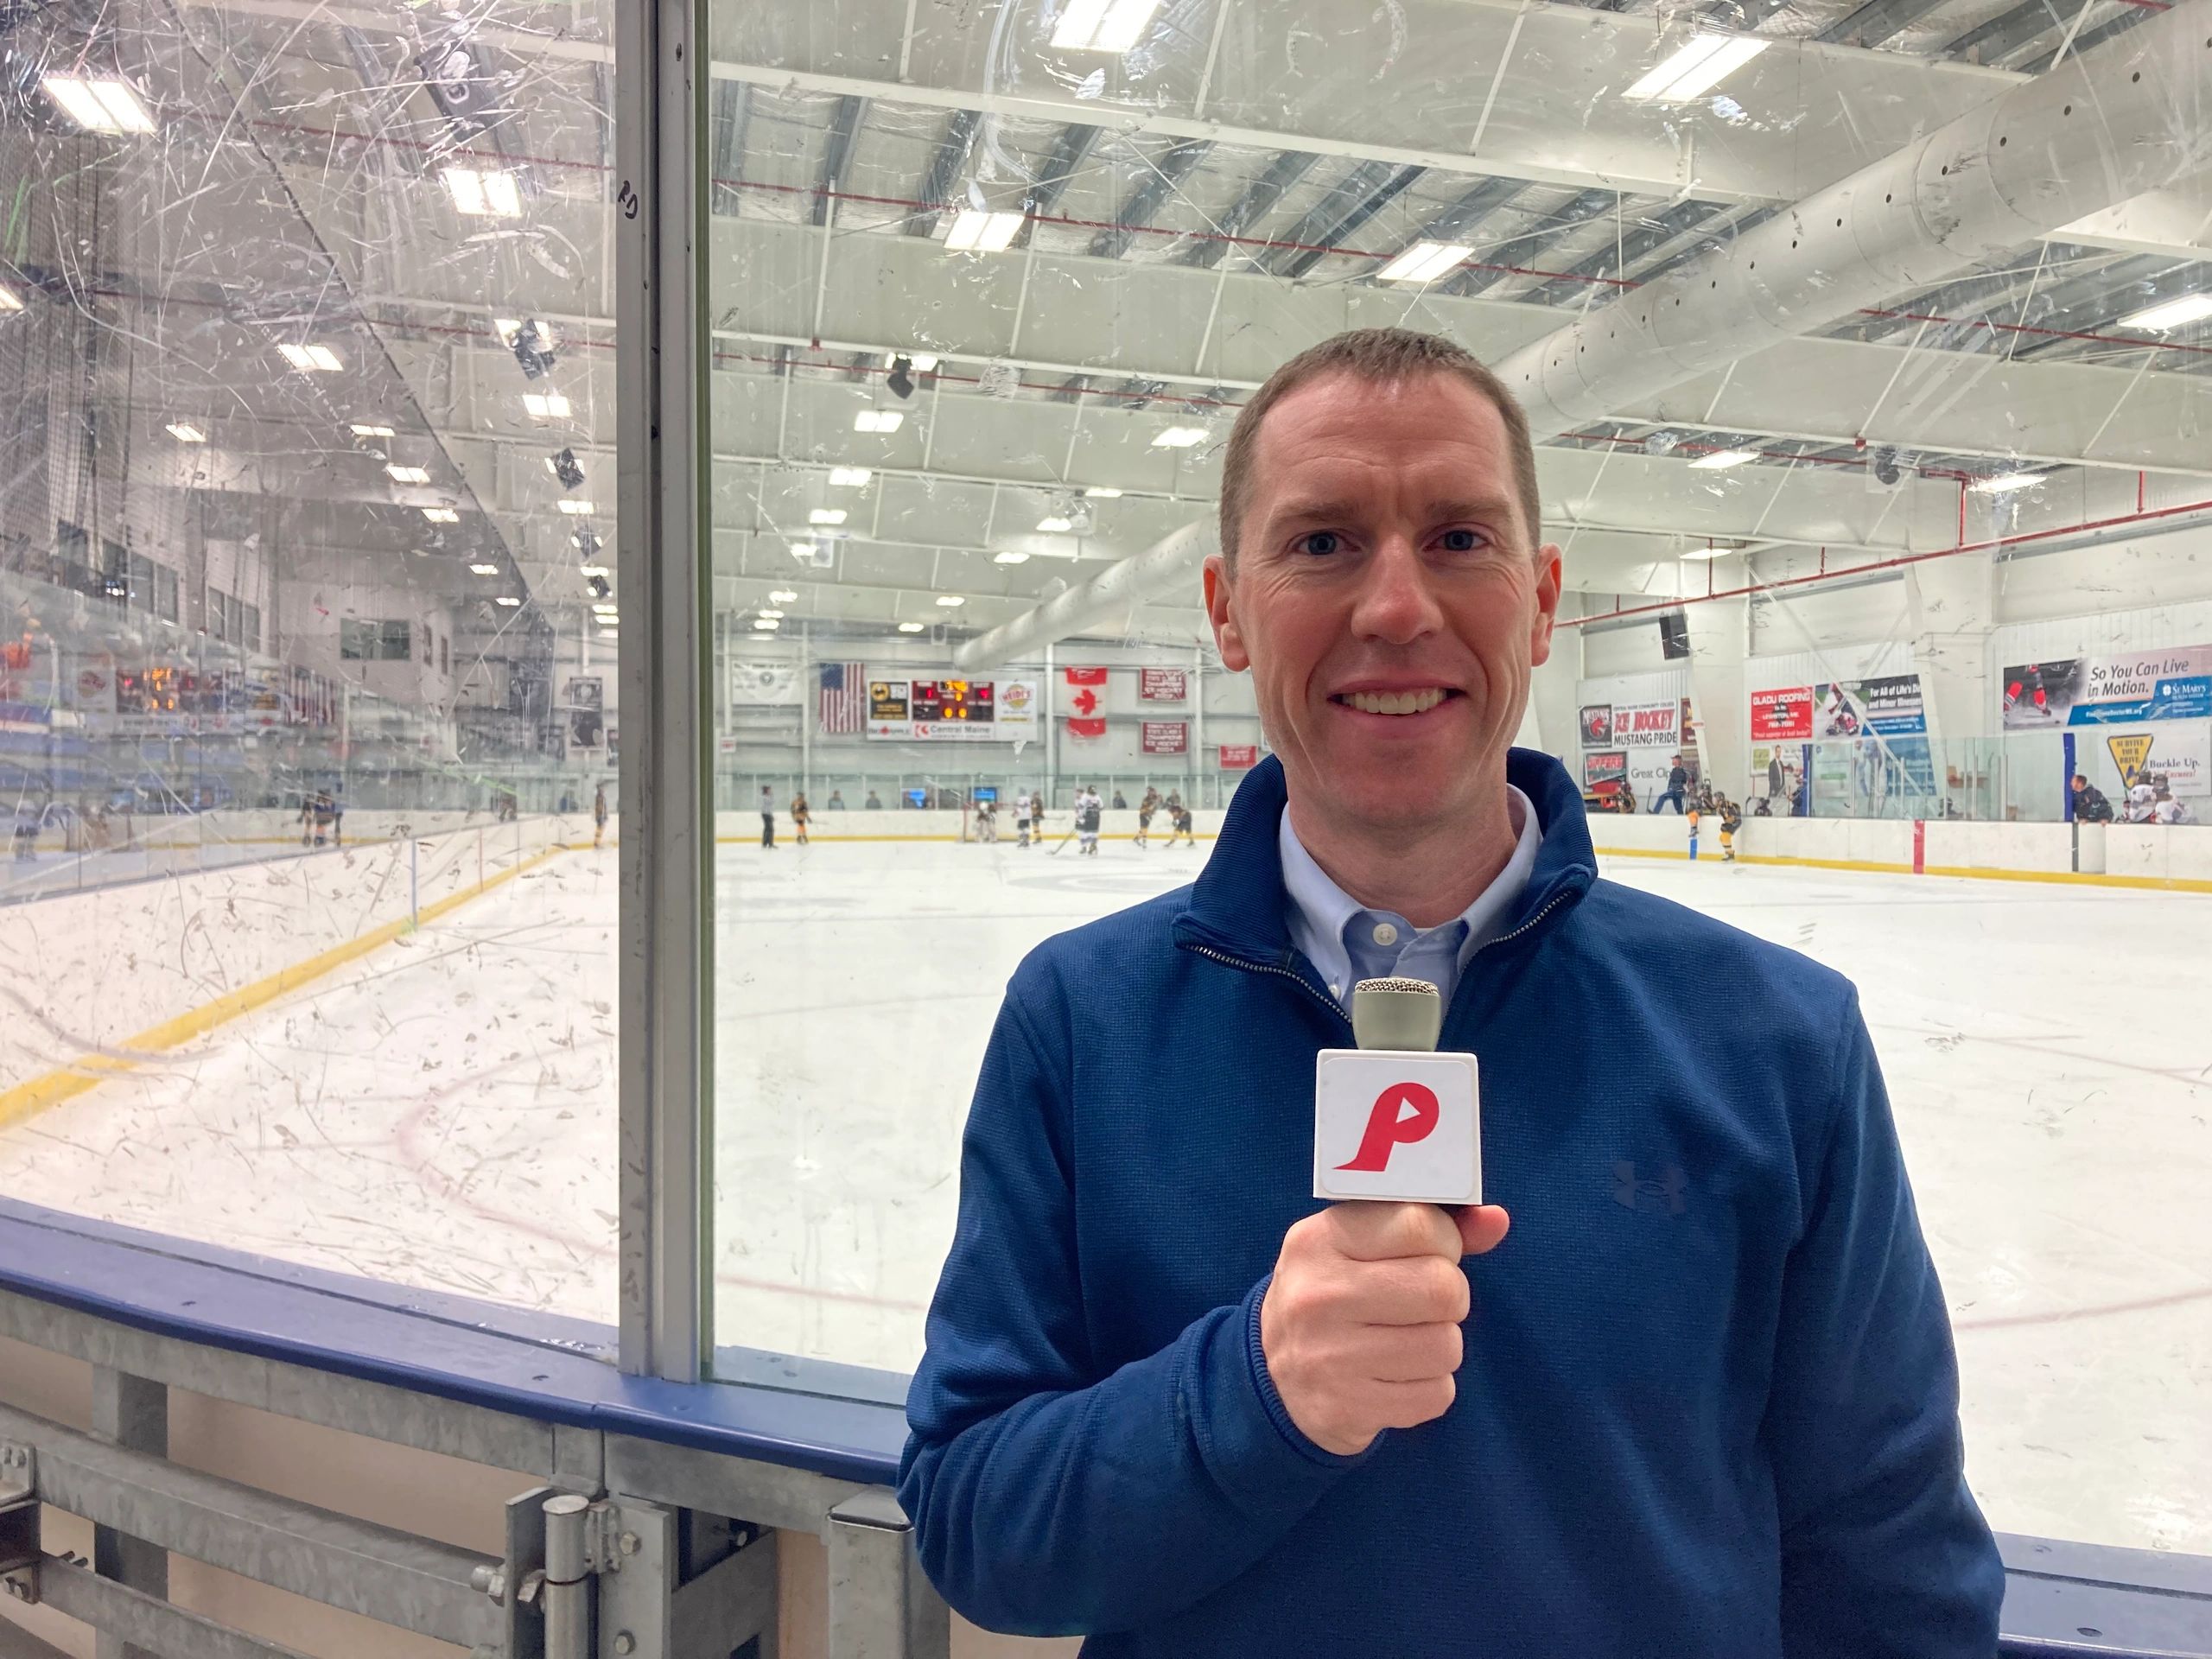 Former Portland Pirates Broadcaster, Launches New Company